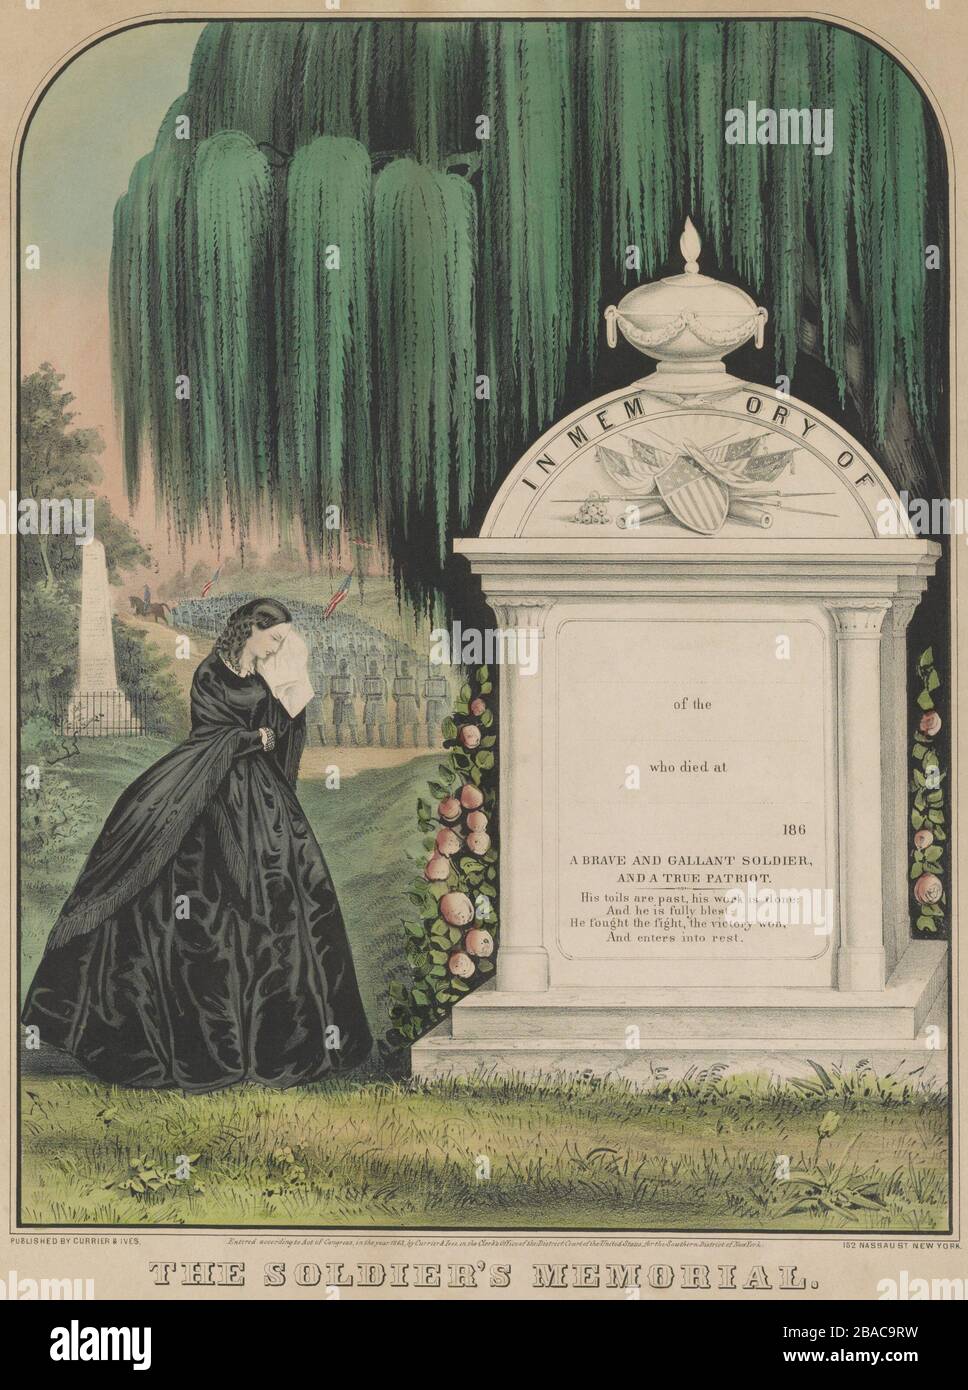 US Civil War memorial print depicting a young women mourning at tomb of Civil War soldier. The print has blank lines for the soldier name, place and date of death, above a tribute to 'A Brave and Gallant Soldier, and a True Patriot'. Soldiers in formation with American flags are in the background  (BSLOC 2019 2 72) Stock Photo